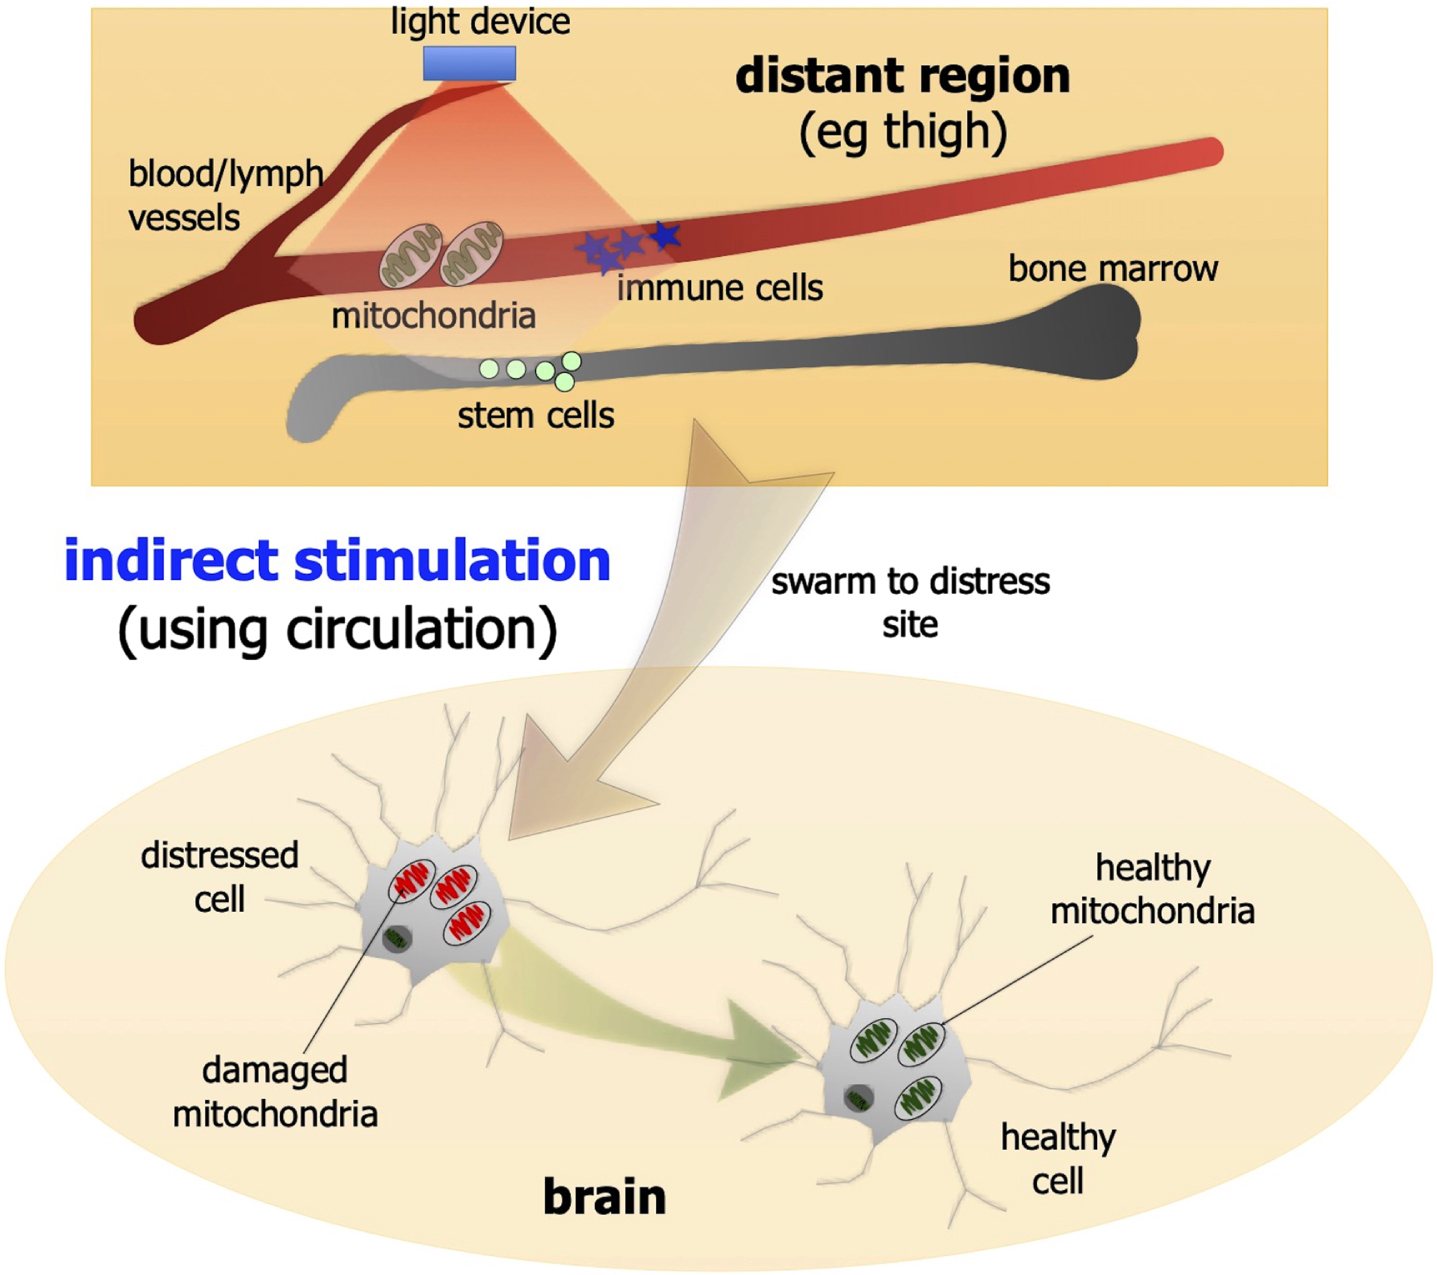 Schematic diagrams outlining the indirect photobiomodulation stimulation. Photobiomodulation has been shown to be beneficial to neurons when it is applied to a more distant or remote location. For example, when photobiomodulation is applied to the thigh, it may activate circulating cells, molecules, or free-floating mitochondria within the cardiovascular or lymphatic systems that then leads to an improved survival and function of distressed neurons located in the brain.